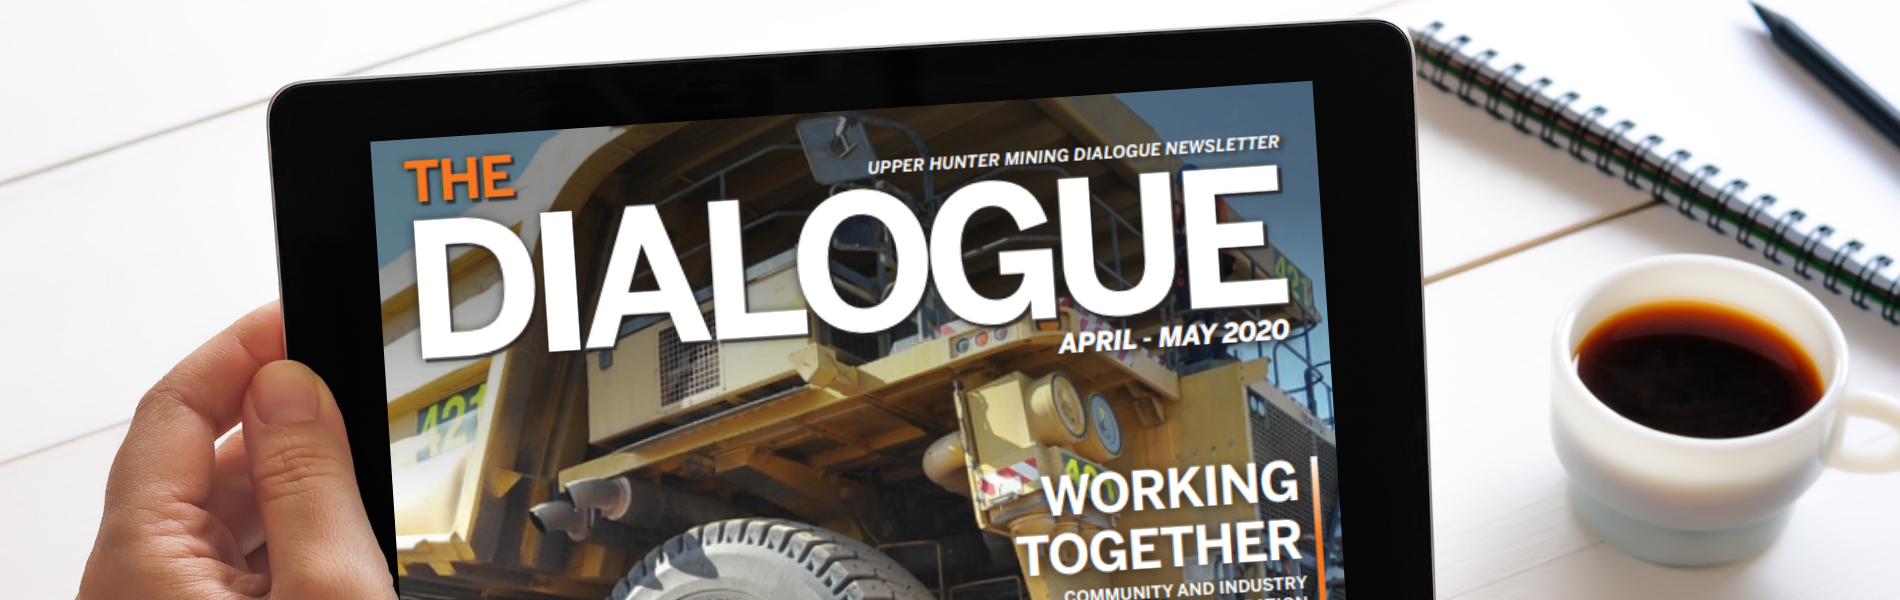 Fresh look for Upper Hunter Mining Dialogue April-May 2020 Newsletter